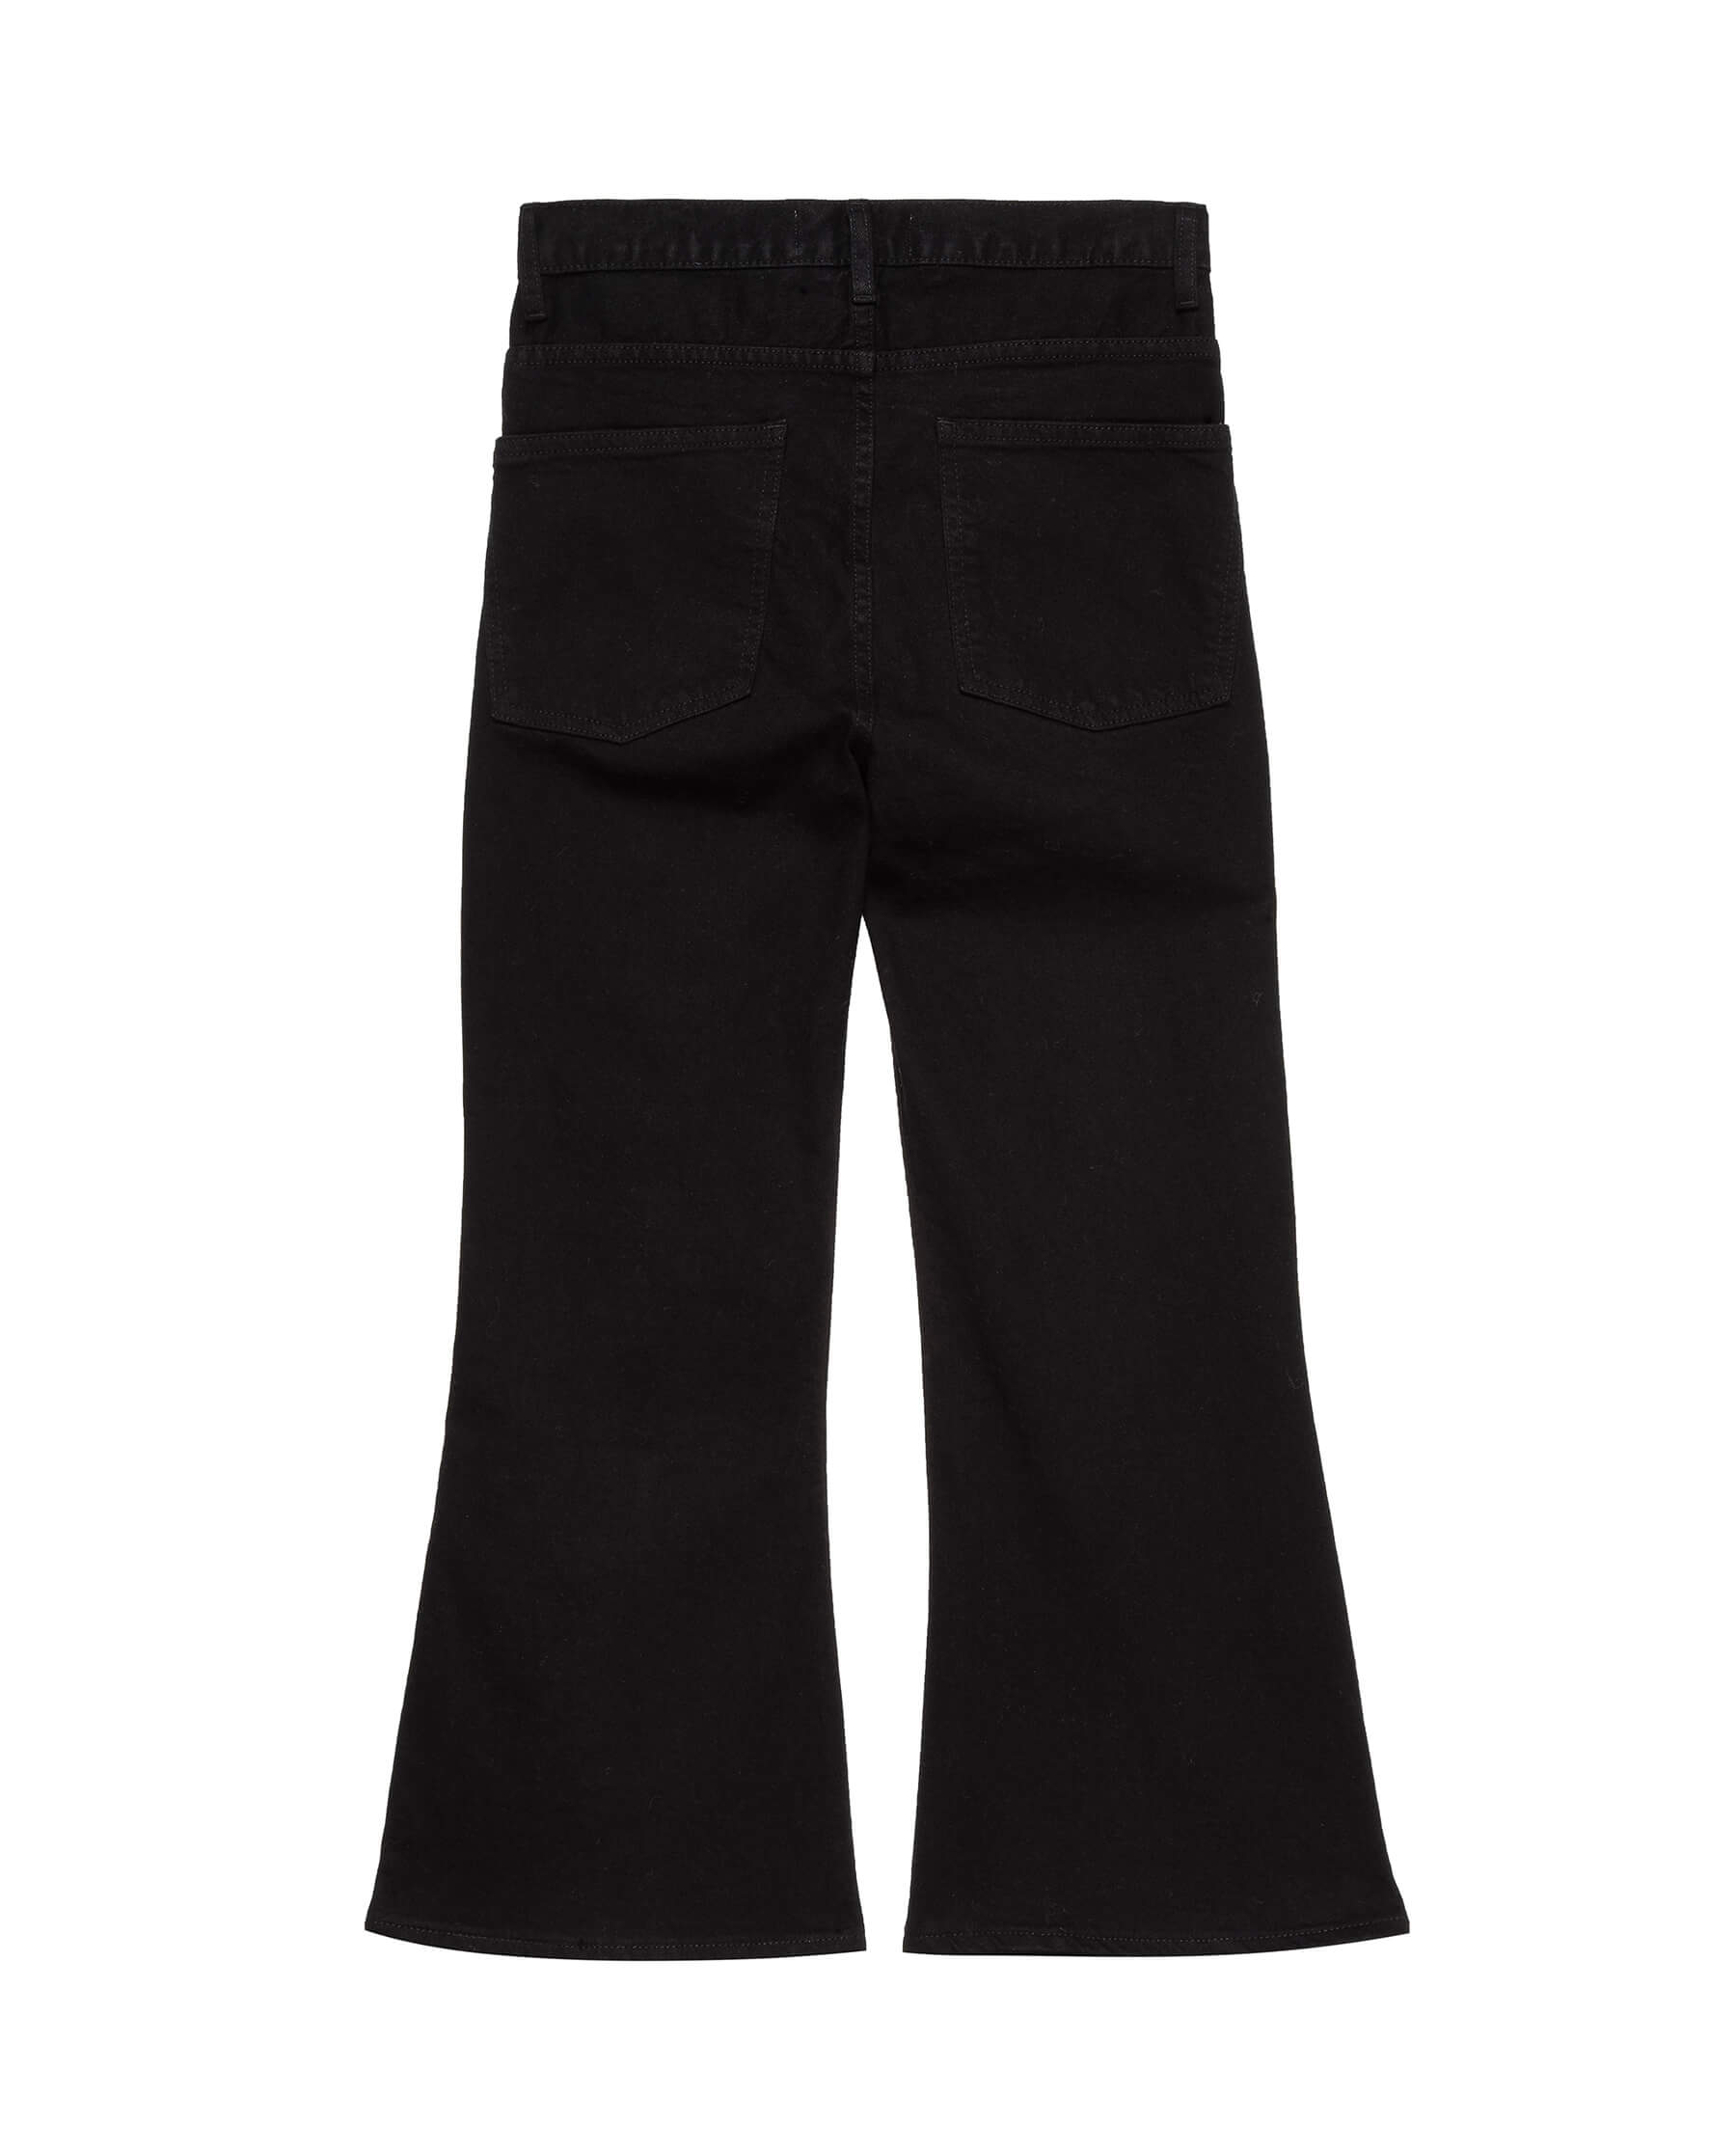 The Kick Bell Jean. -- Carbon